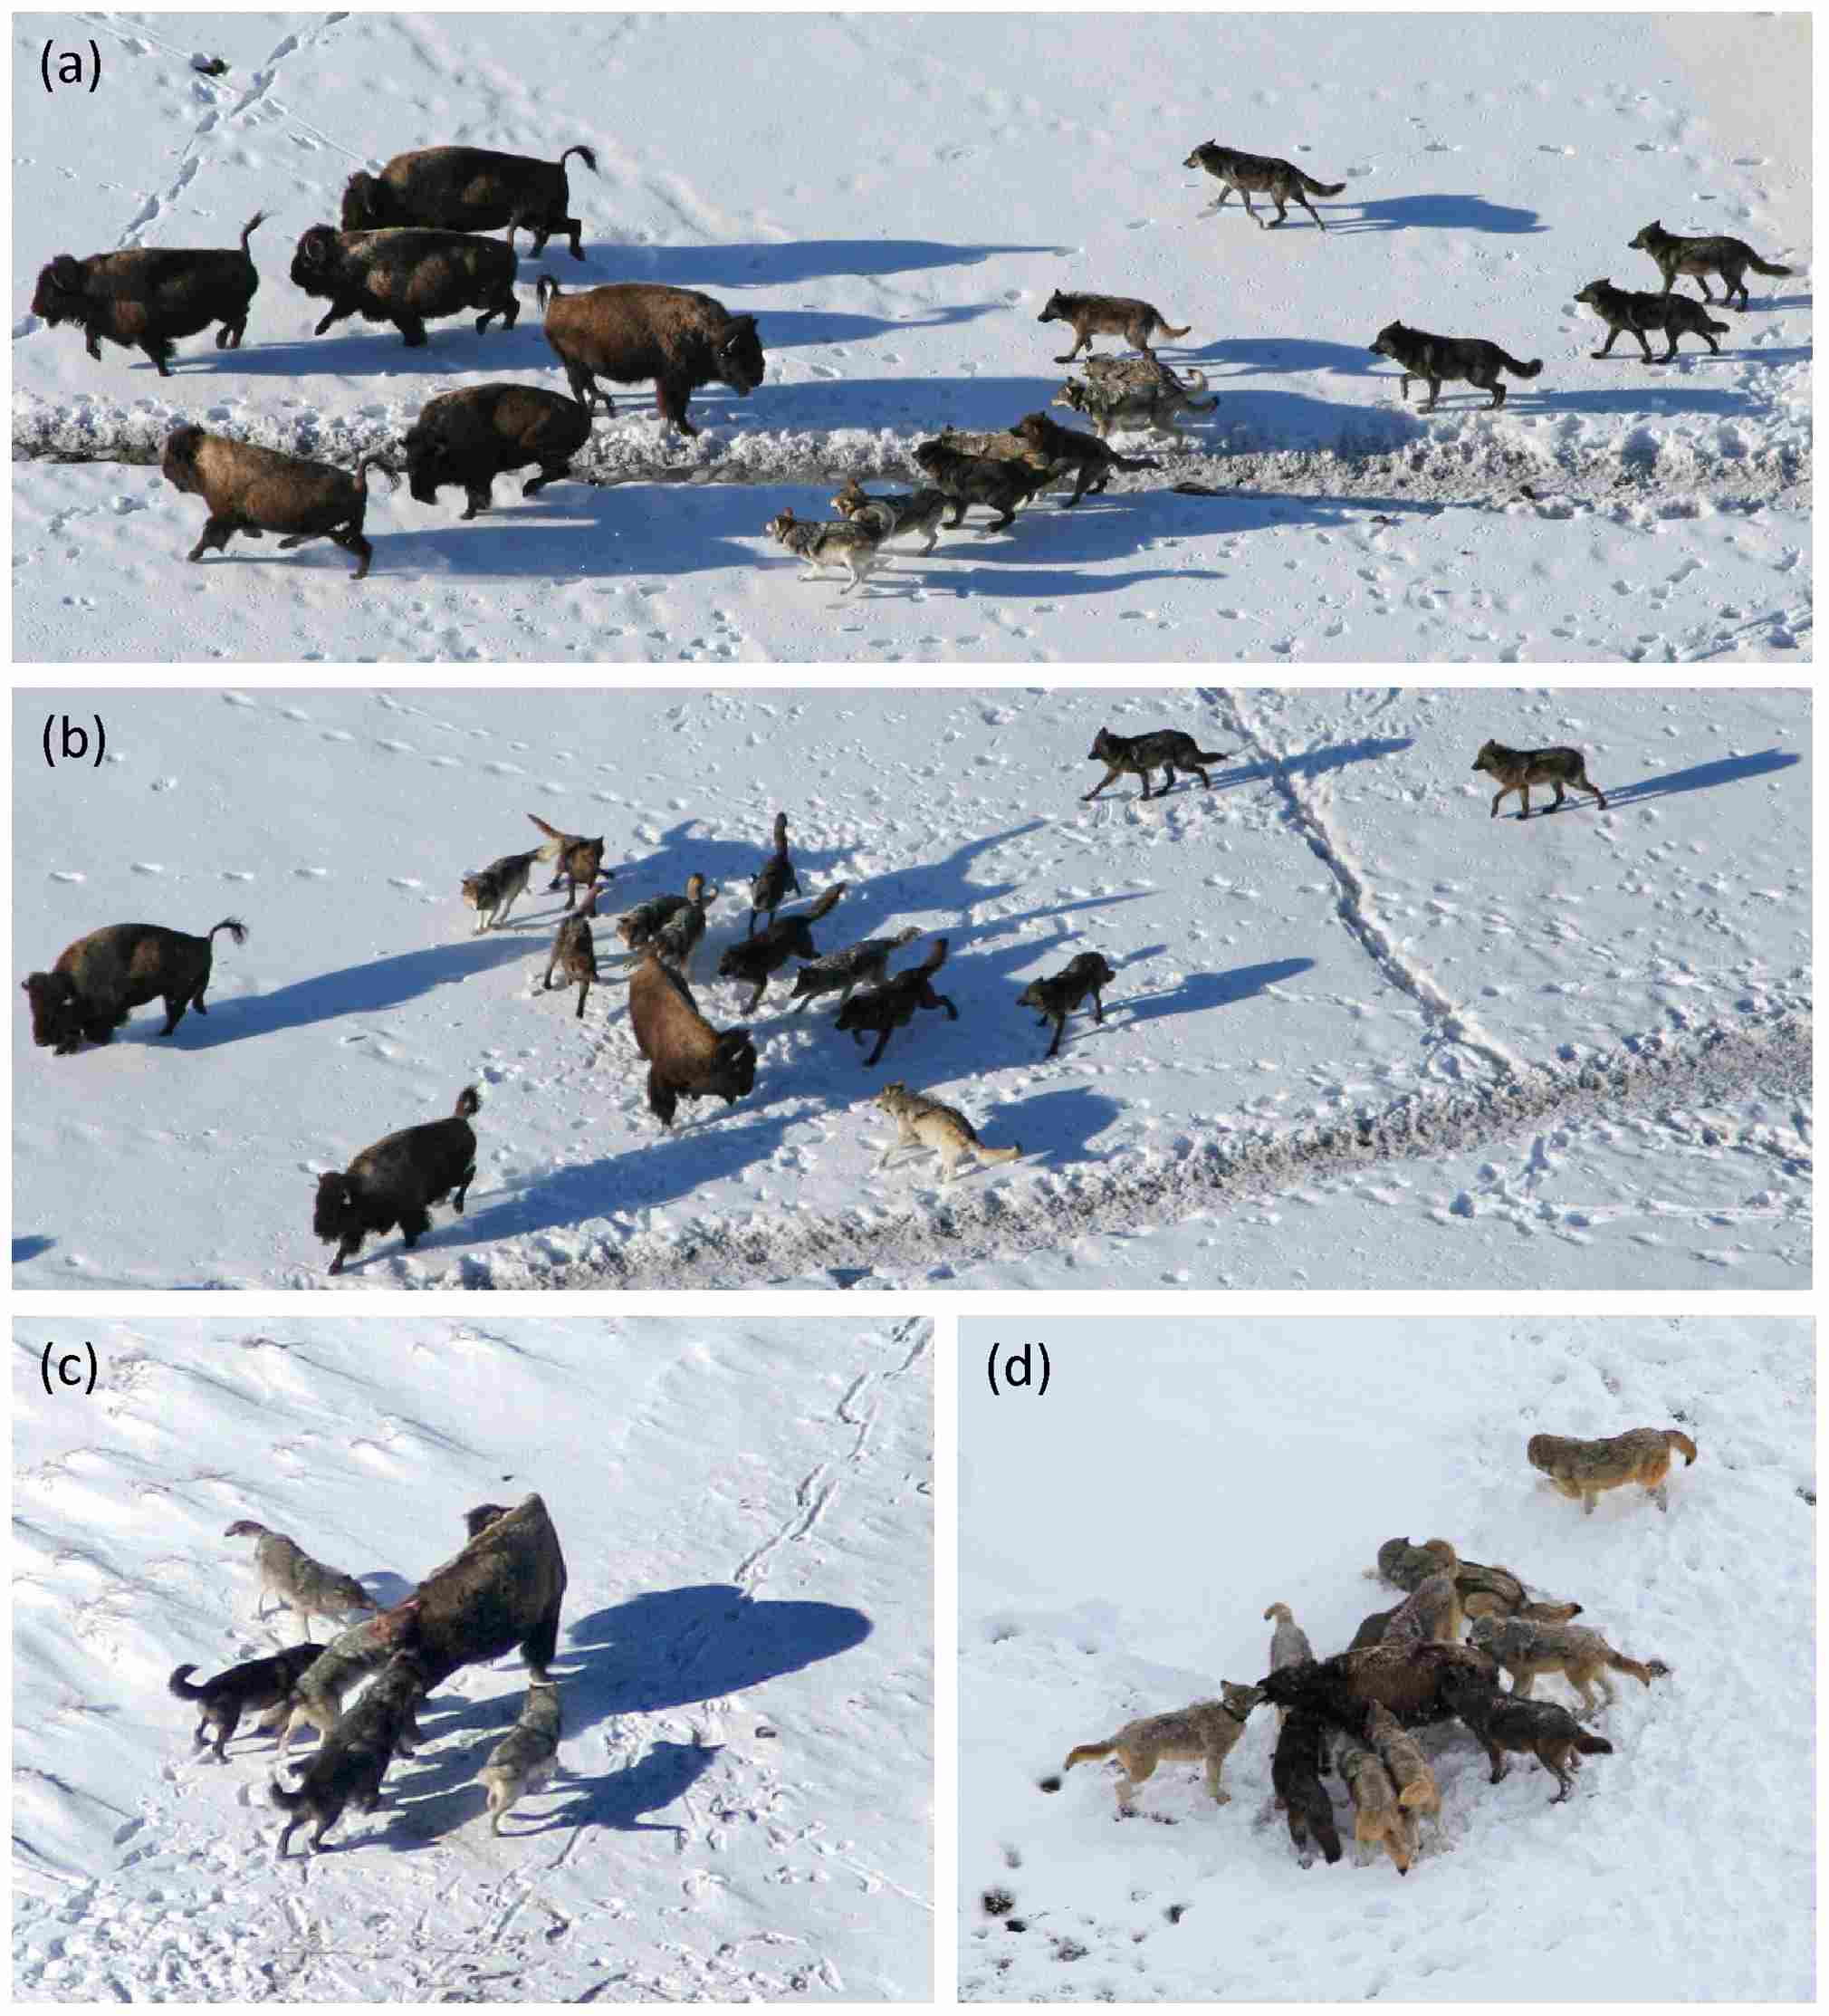 Wolf Vs Hyena: Cooperative Hunting Techniques Occur Among Both Wolves and Hyenas (Credit: MacNulty DR, Tallian A, Stahler DR, Smith DW 2014 .CC BY 4.0.)